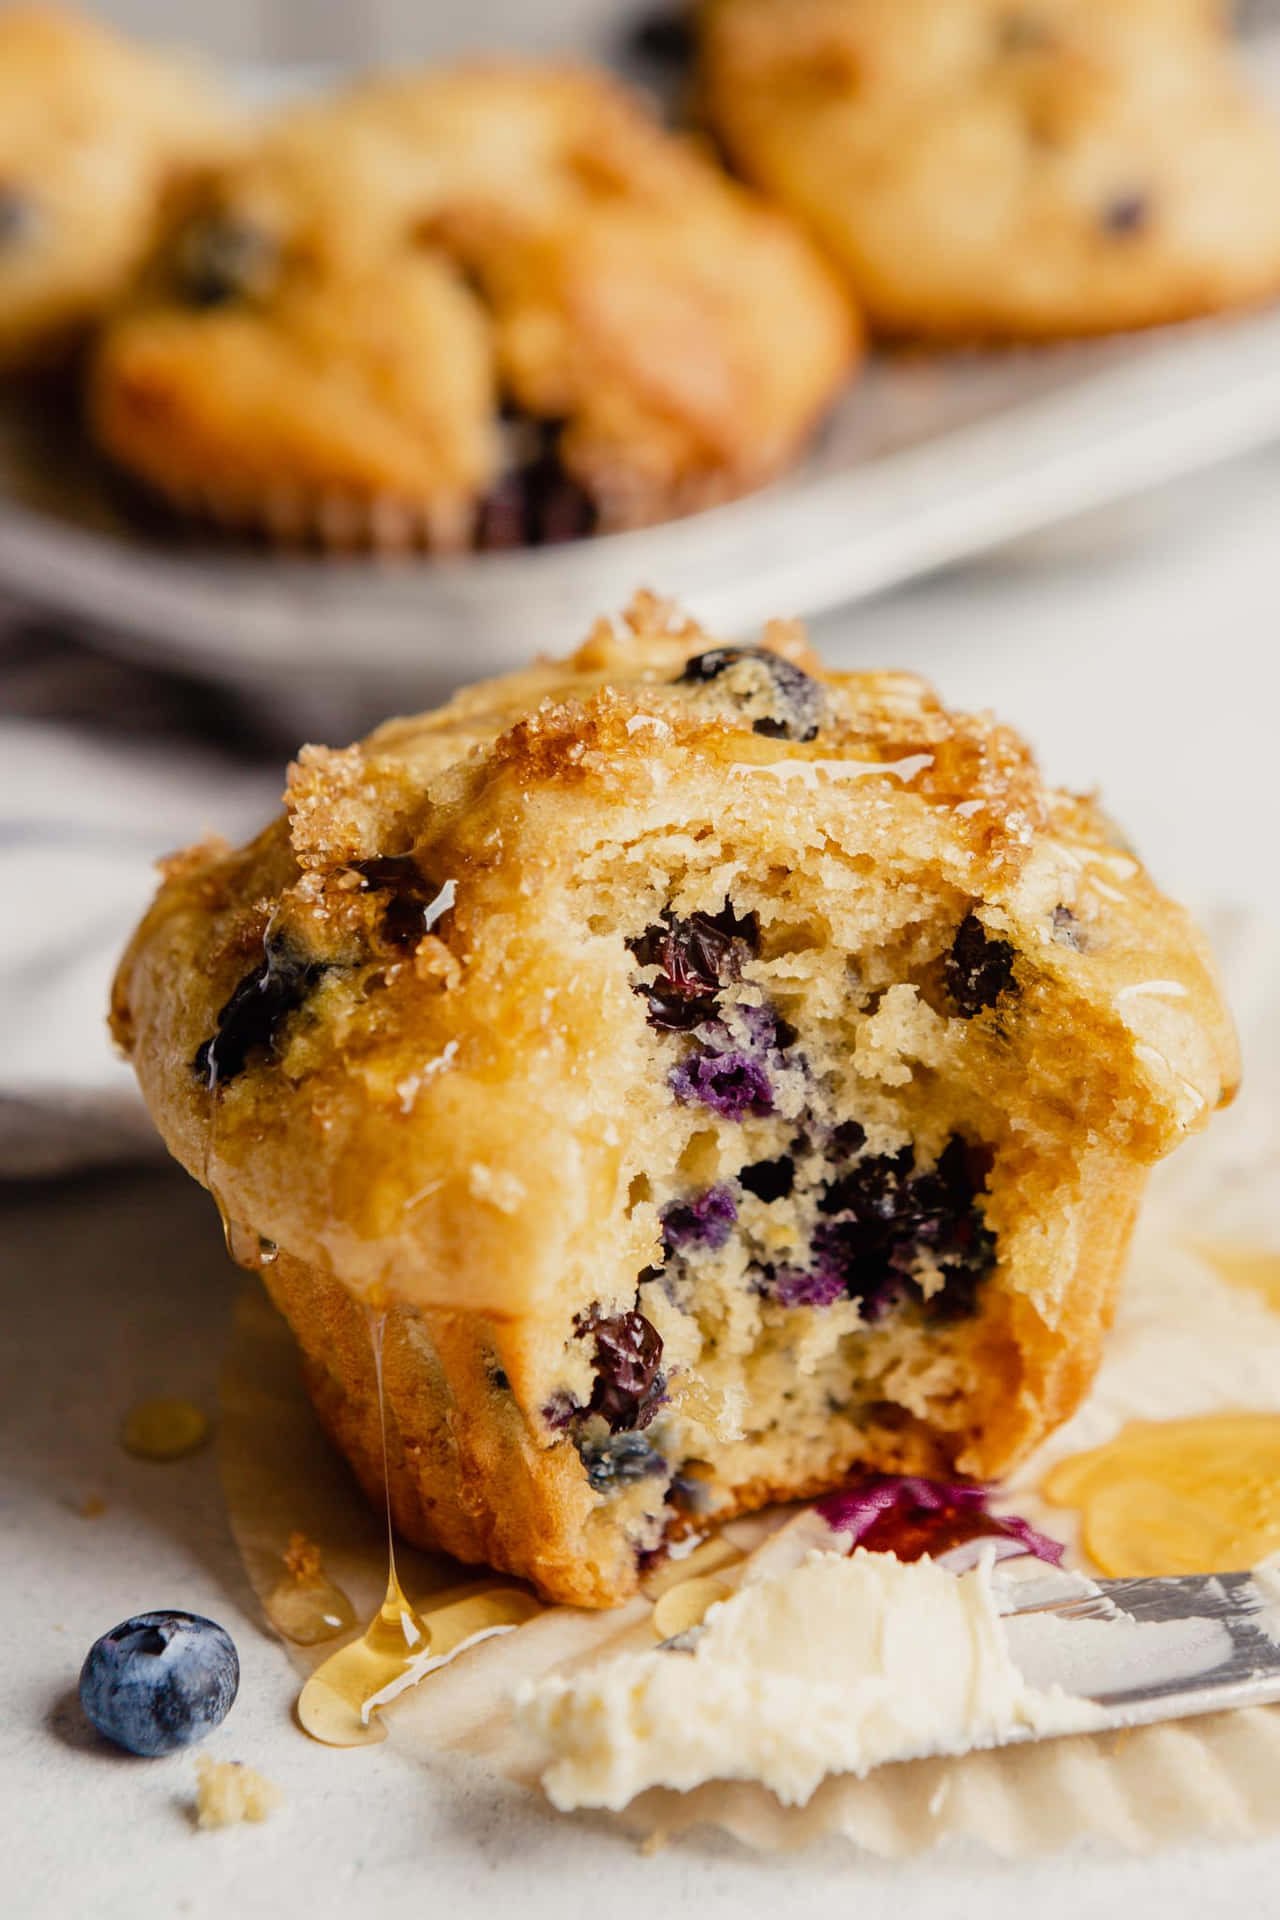 Enjoy the sweet aroma of freshly baked blueberry muffins! Wallpaper